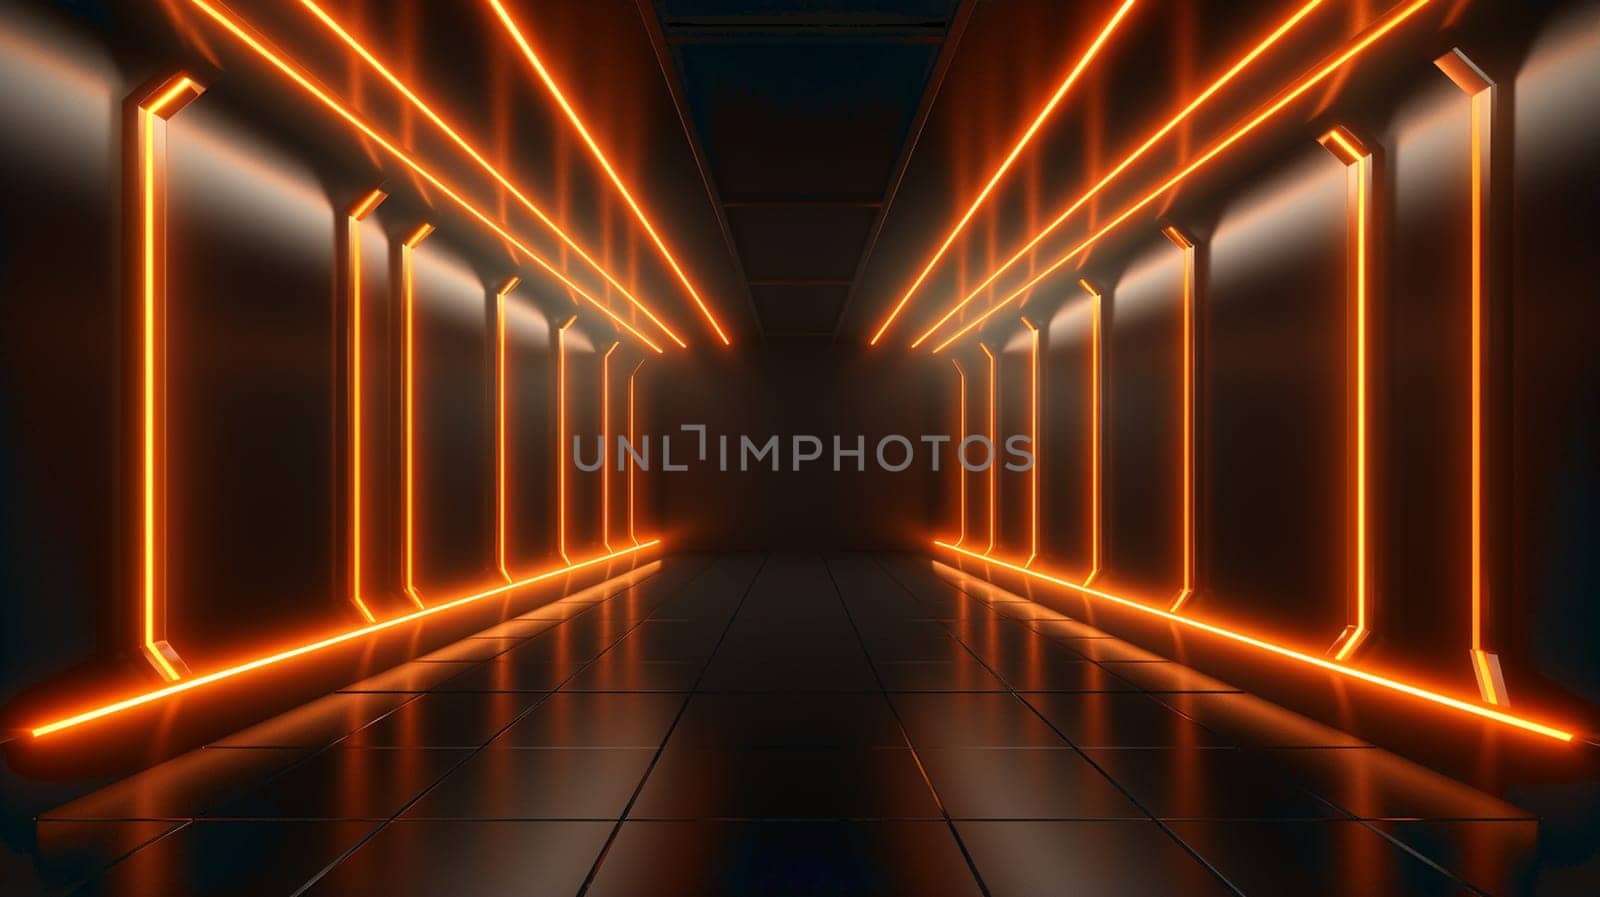 View of a Server abstract background illustration - 3d rendering